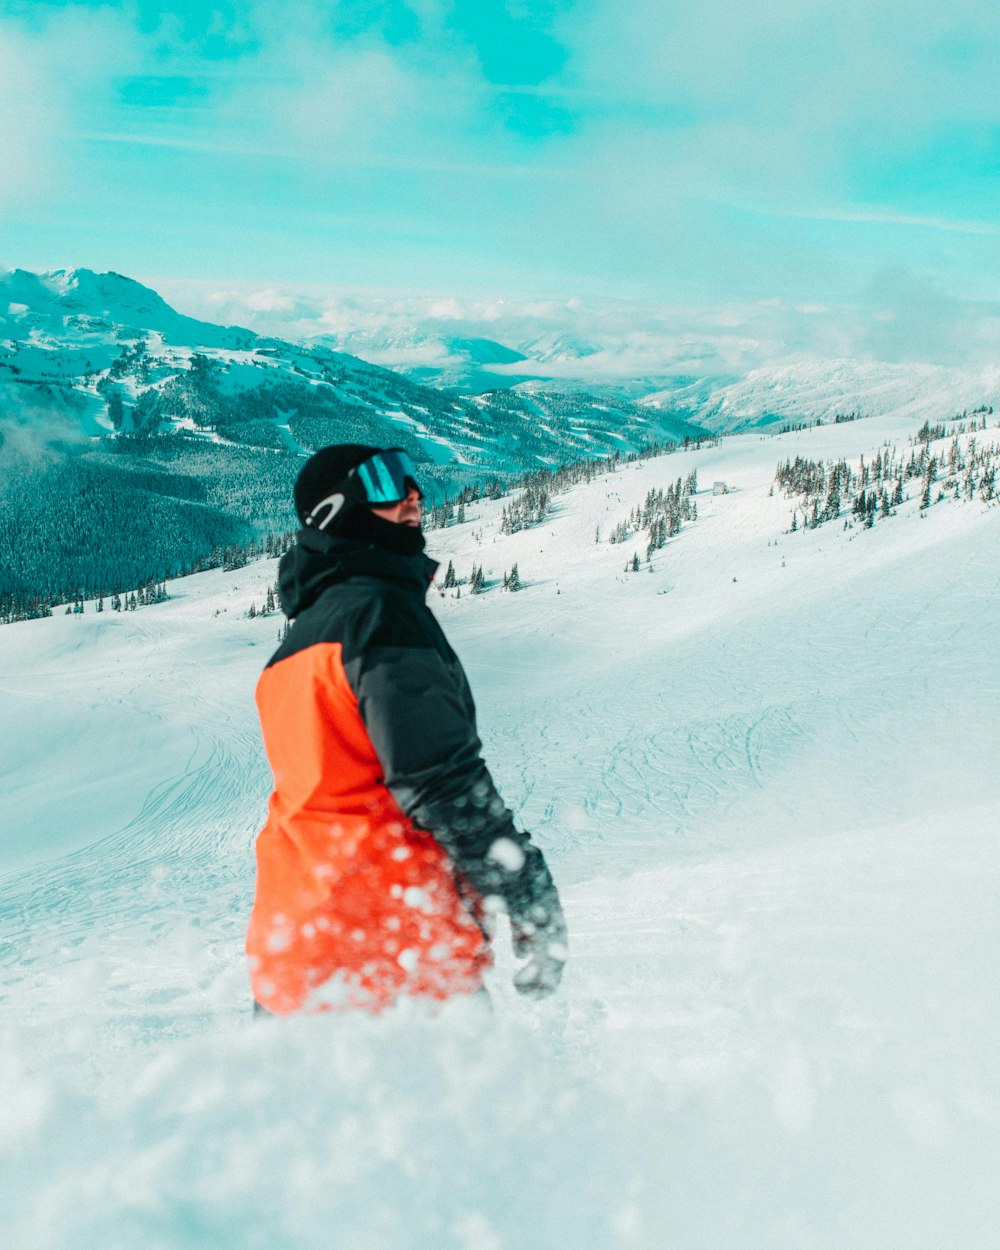 a person in an orange and black jacket on a snowboard